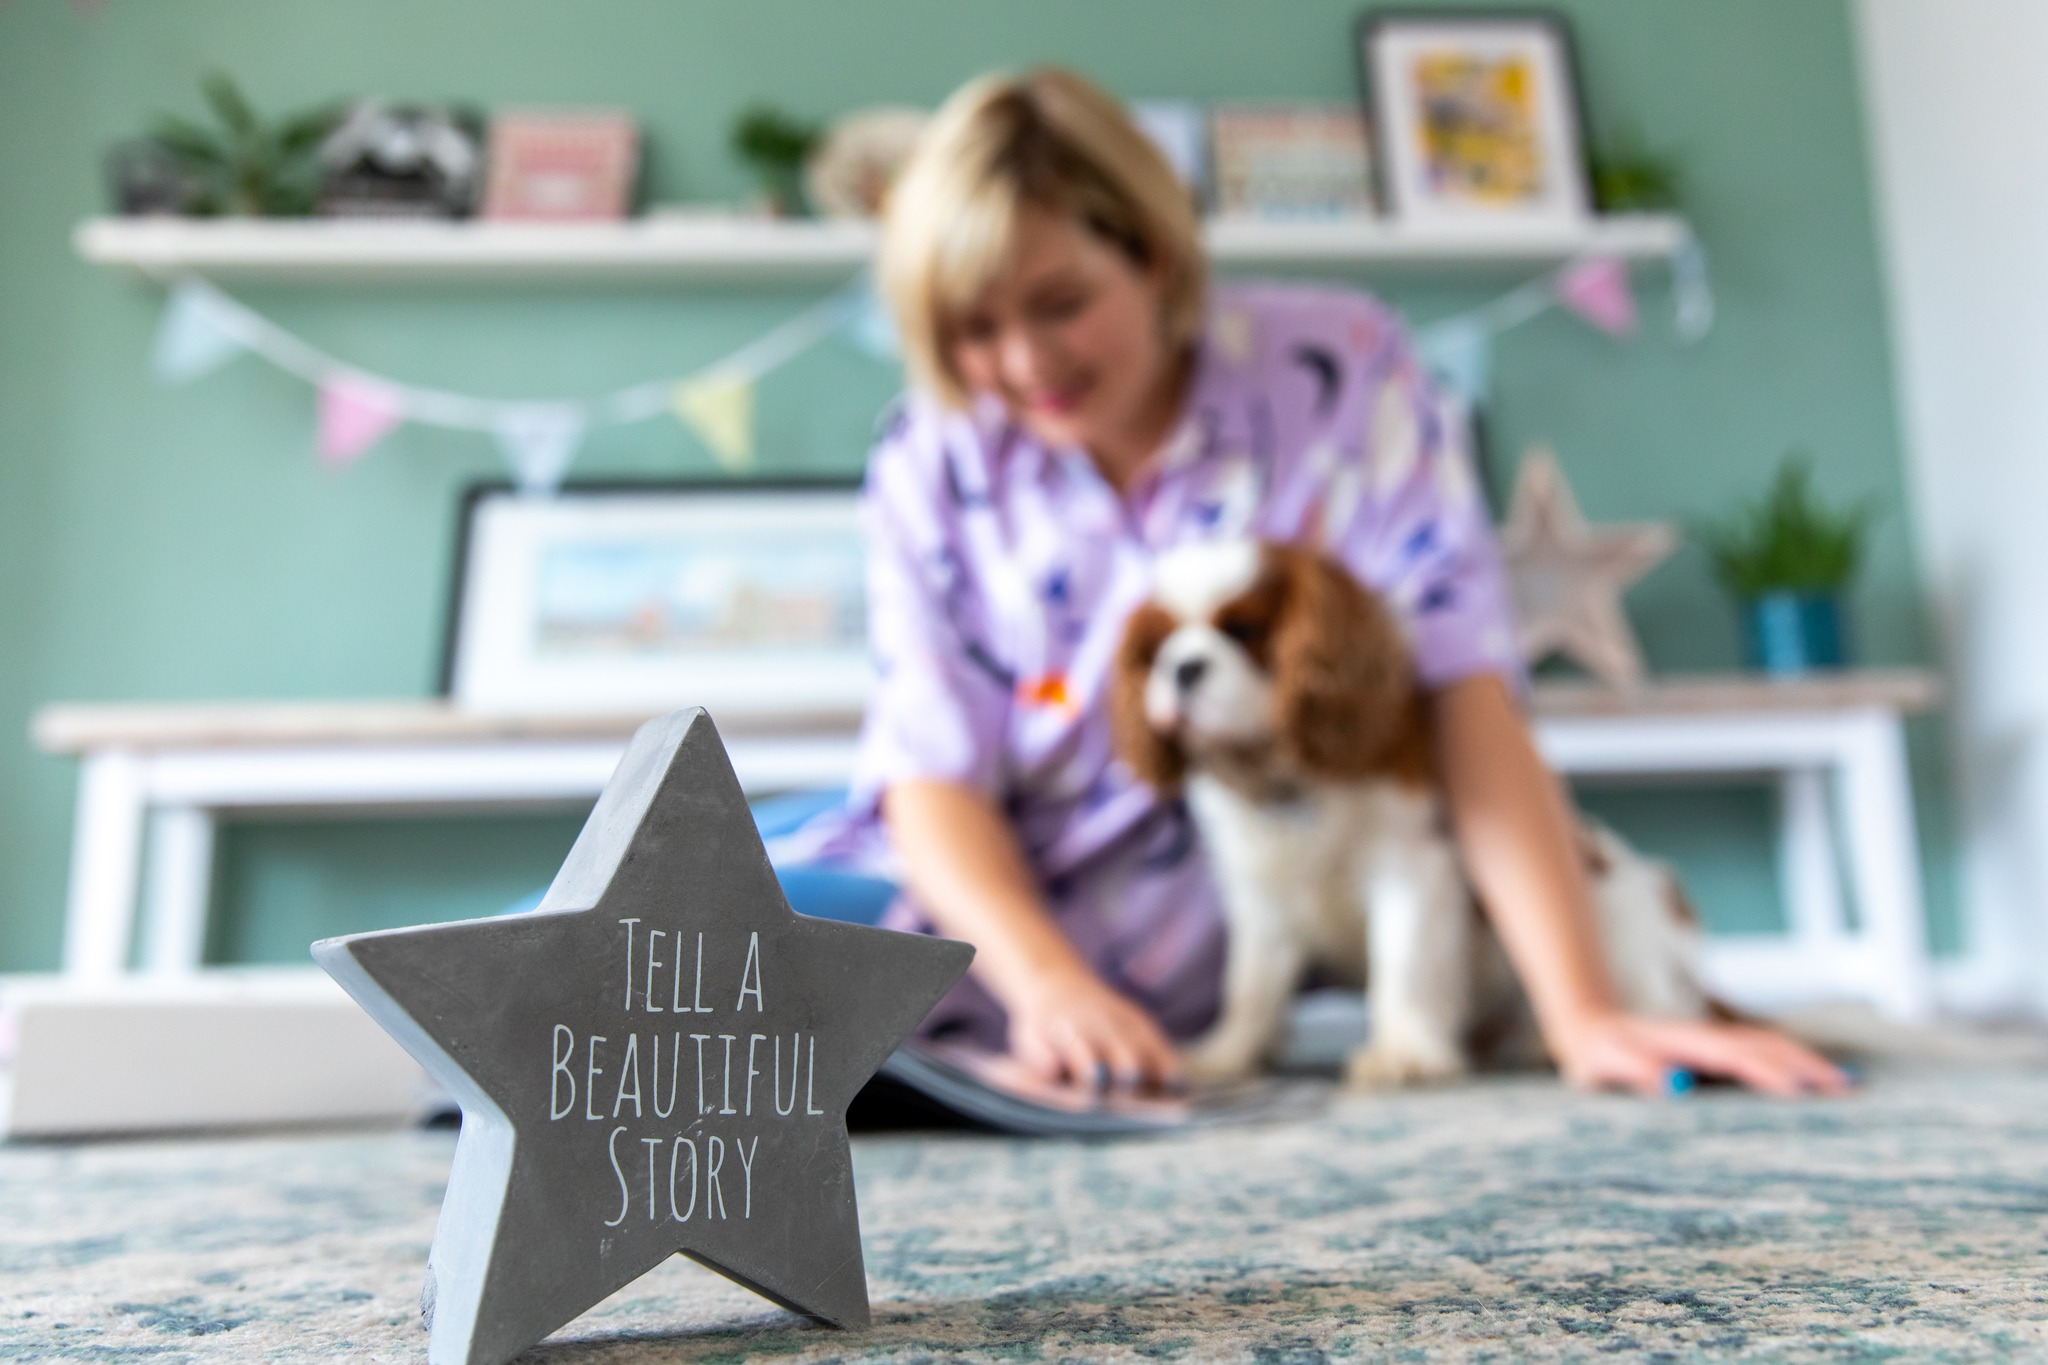 A picture of the owner of Brand Remarkable, Charlotte, sat with her dog. In the foreground is a star with the words "tell a beautiful story" on it